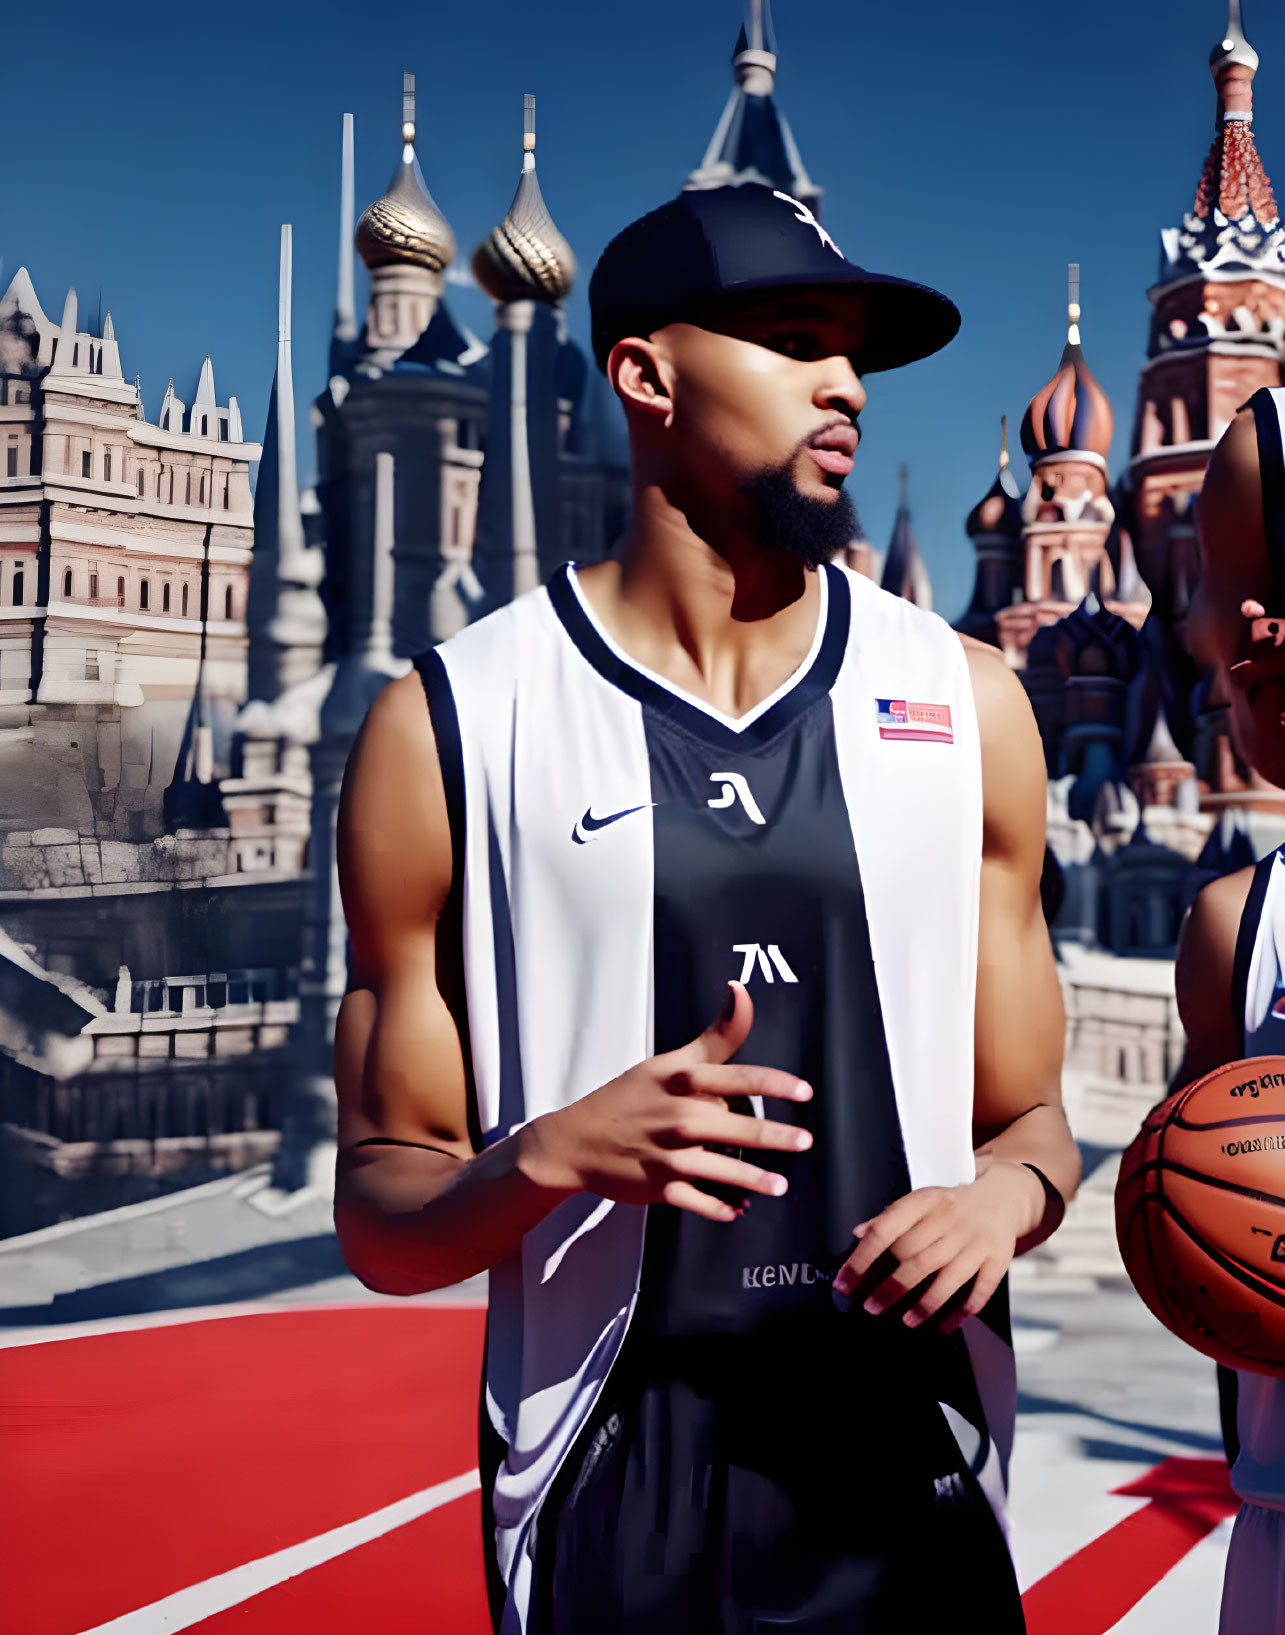 Basketball player in jersey converses on court with onion-domed buildings in background